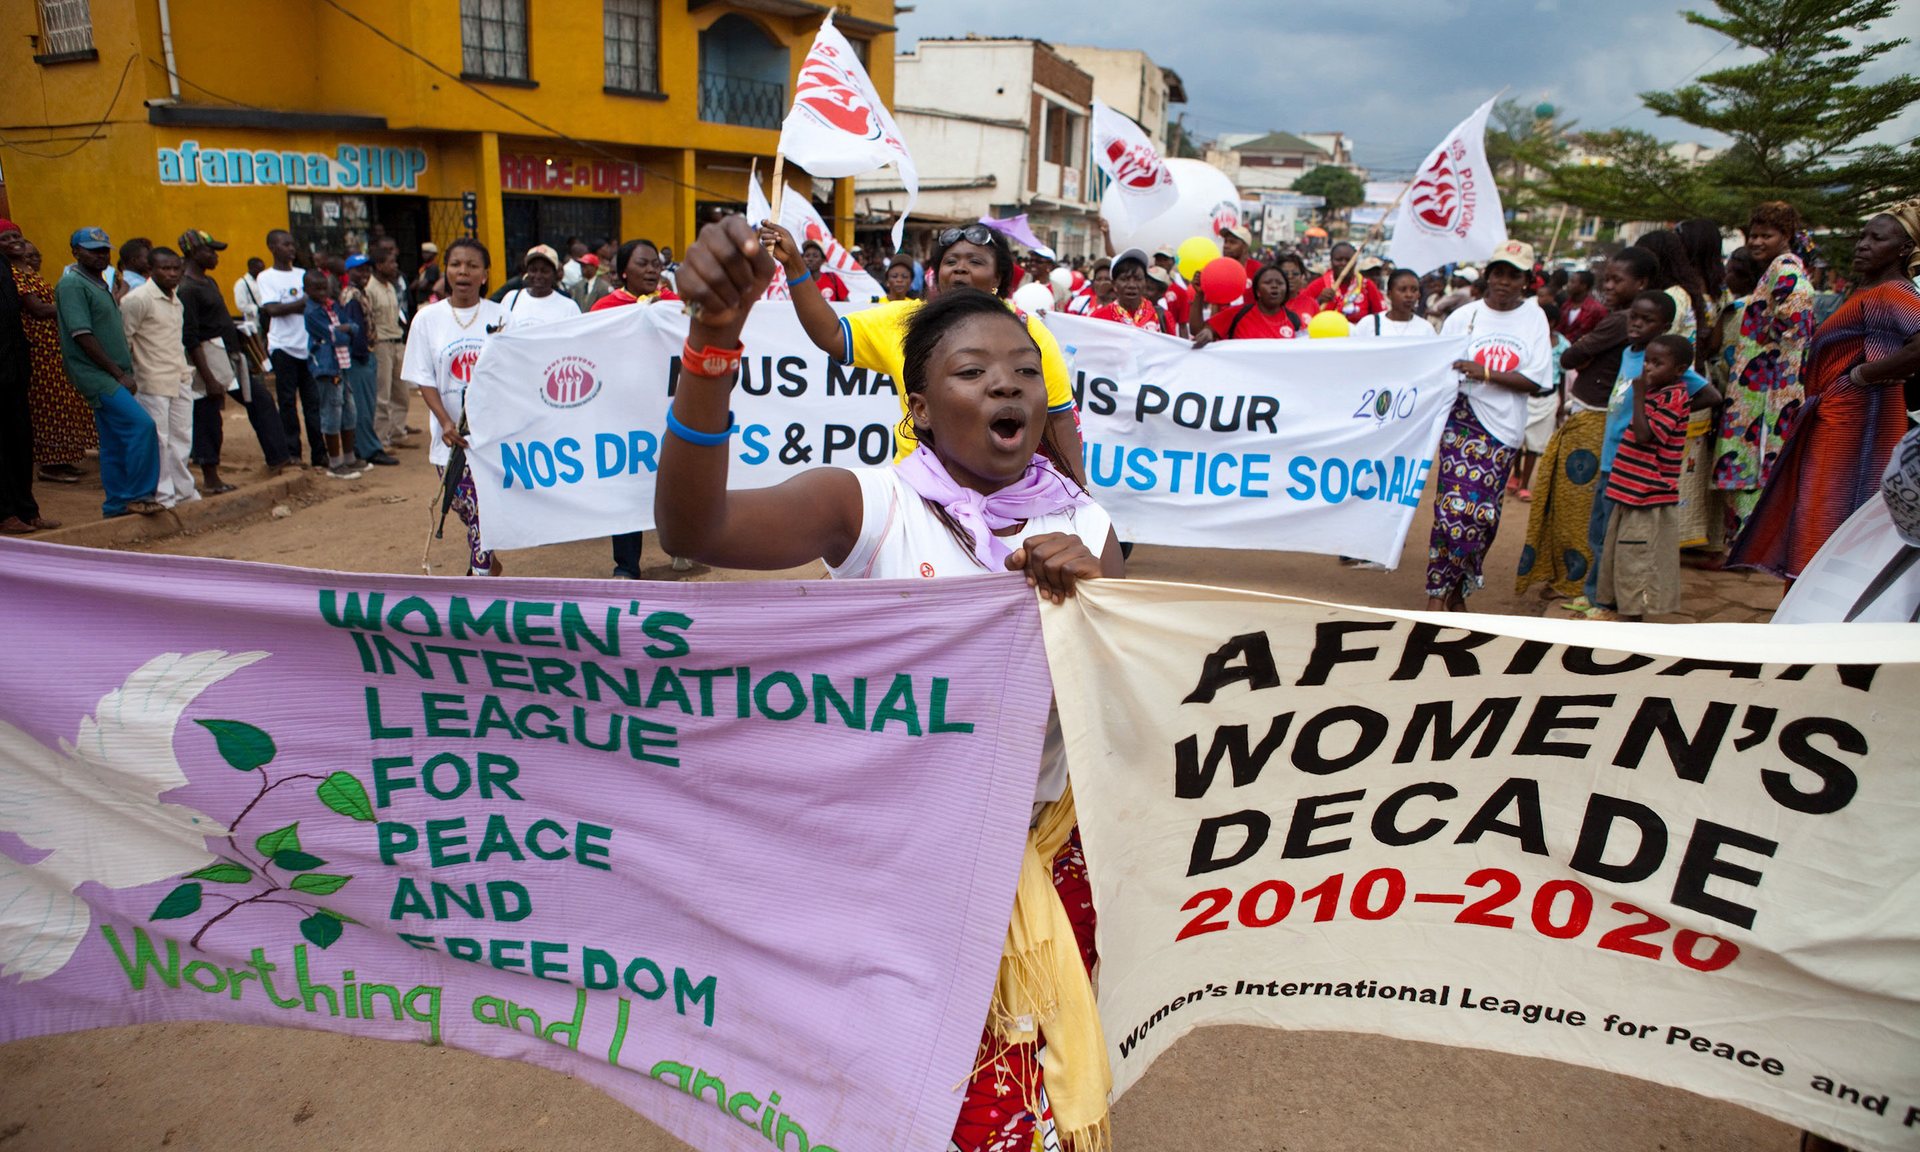 Women in Bukavu, in the Democratic Republic of the Congo’s South Kivu province, participate in the World March of Women in October 2010. Photograph: Gwenn Dubourthoumieu/AFP/Getty Images